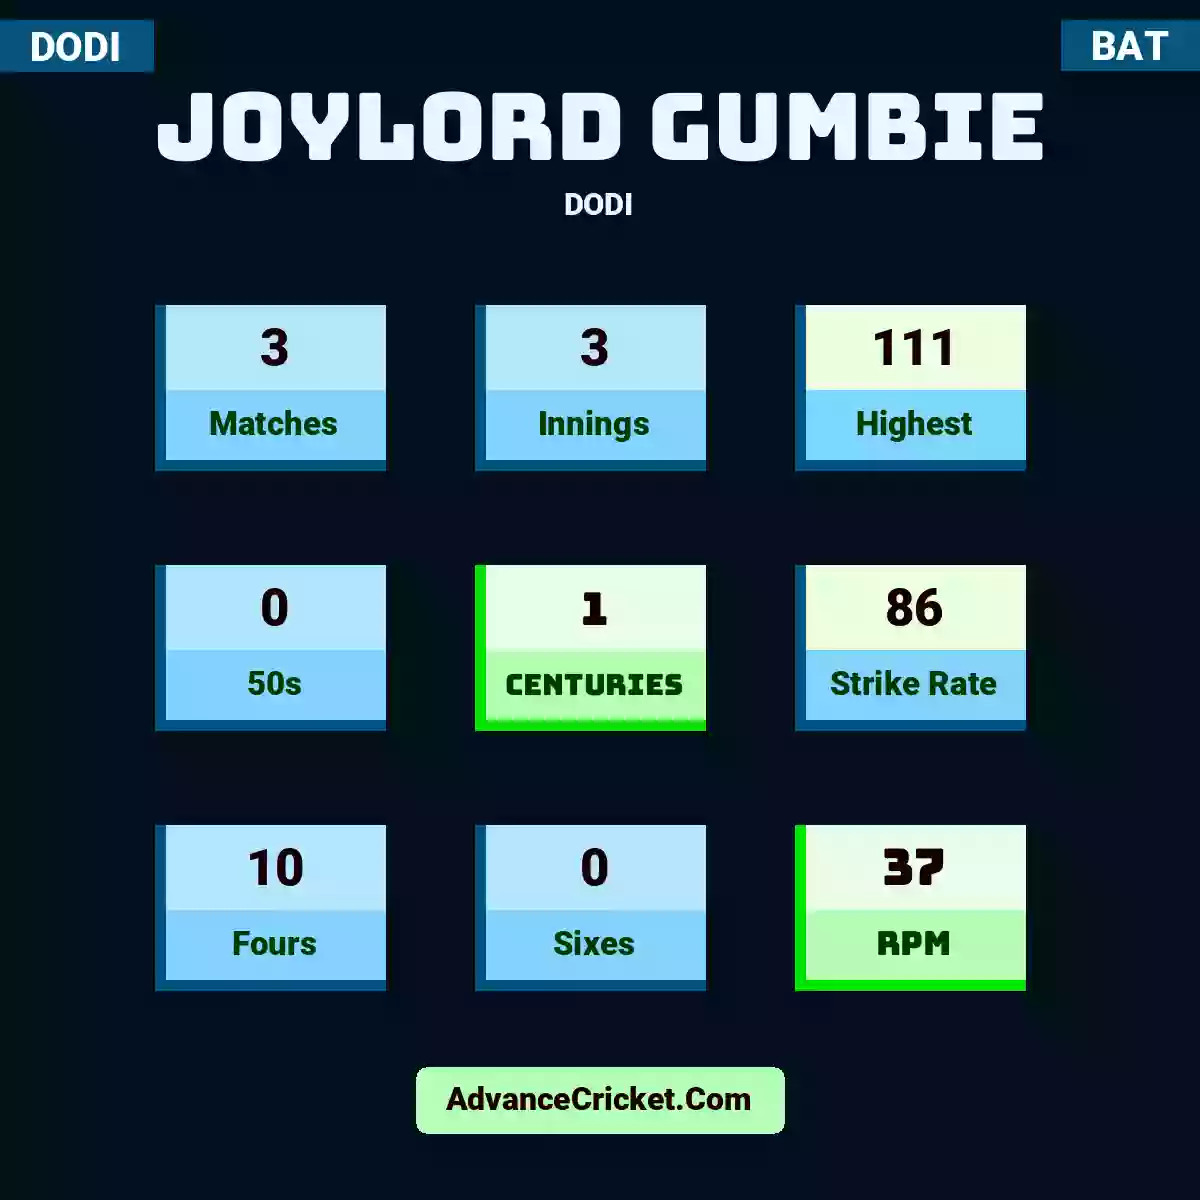 Joylord Gumbie DODI , Joylord Gumbie played 3 matches, scored 111 runs as highest, 0 half-centuries, and 1 centuries, with a strike rate of 86. J.Gumbie hit 10 fours and 0 sixes, with an RPM of 37.